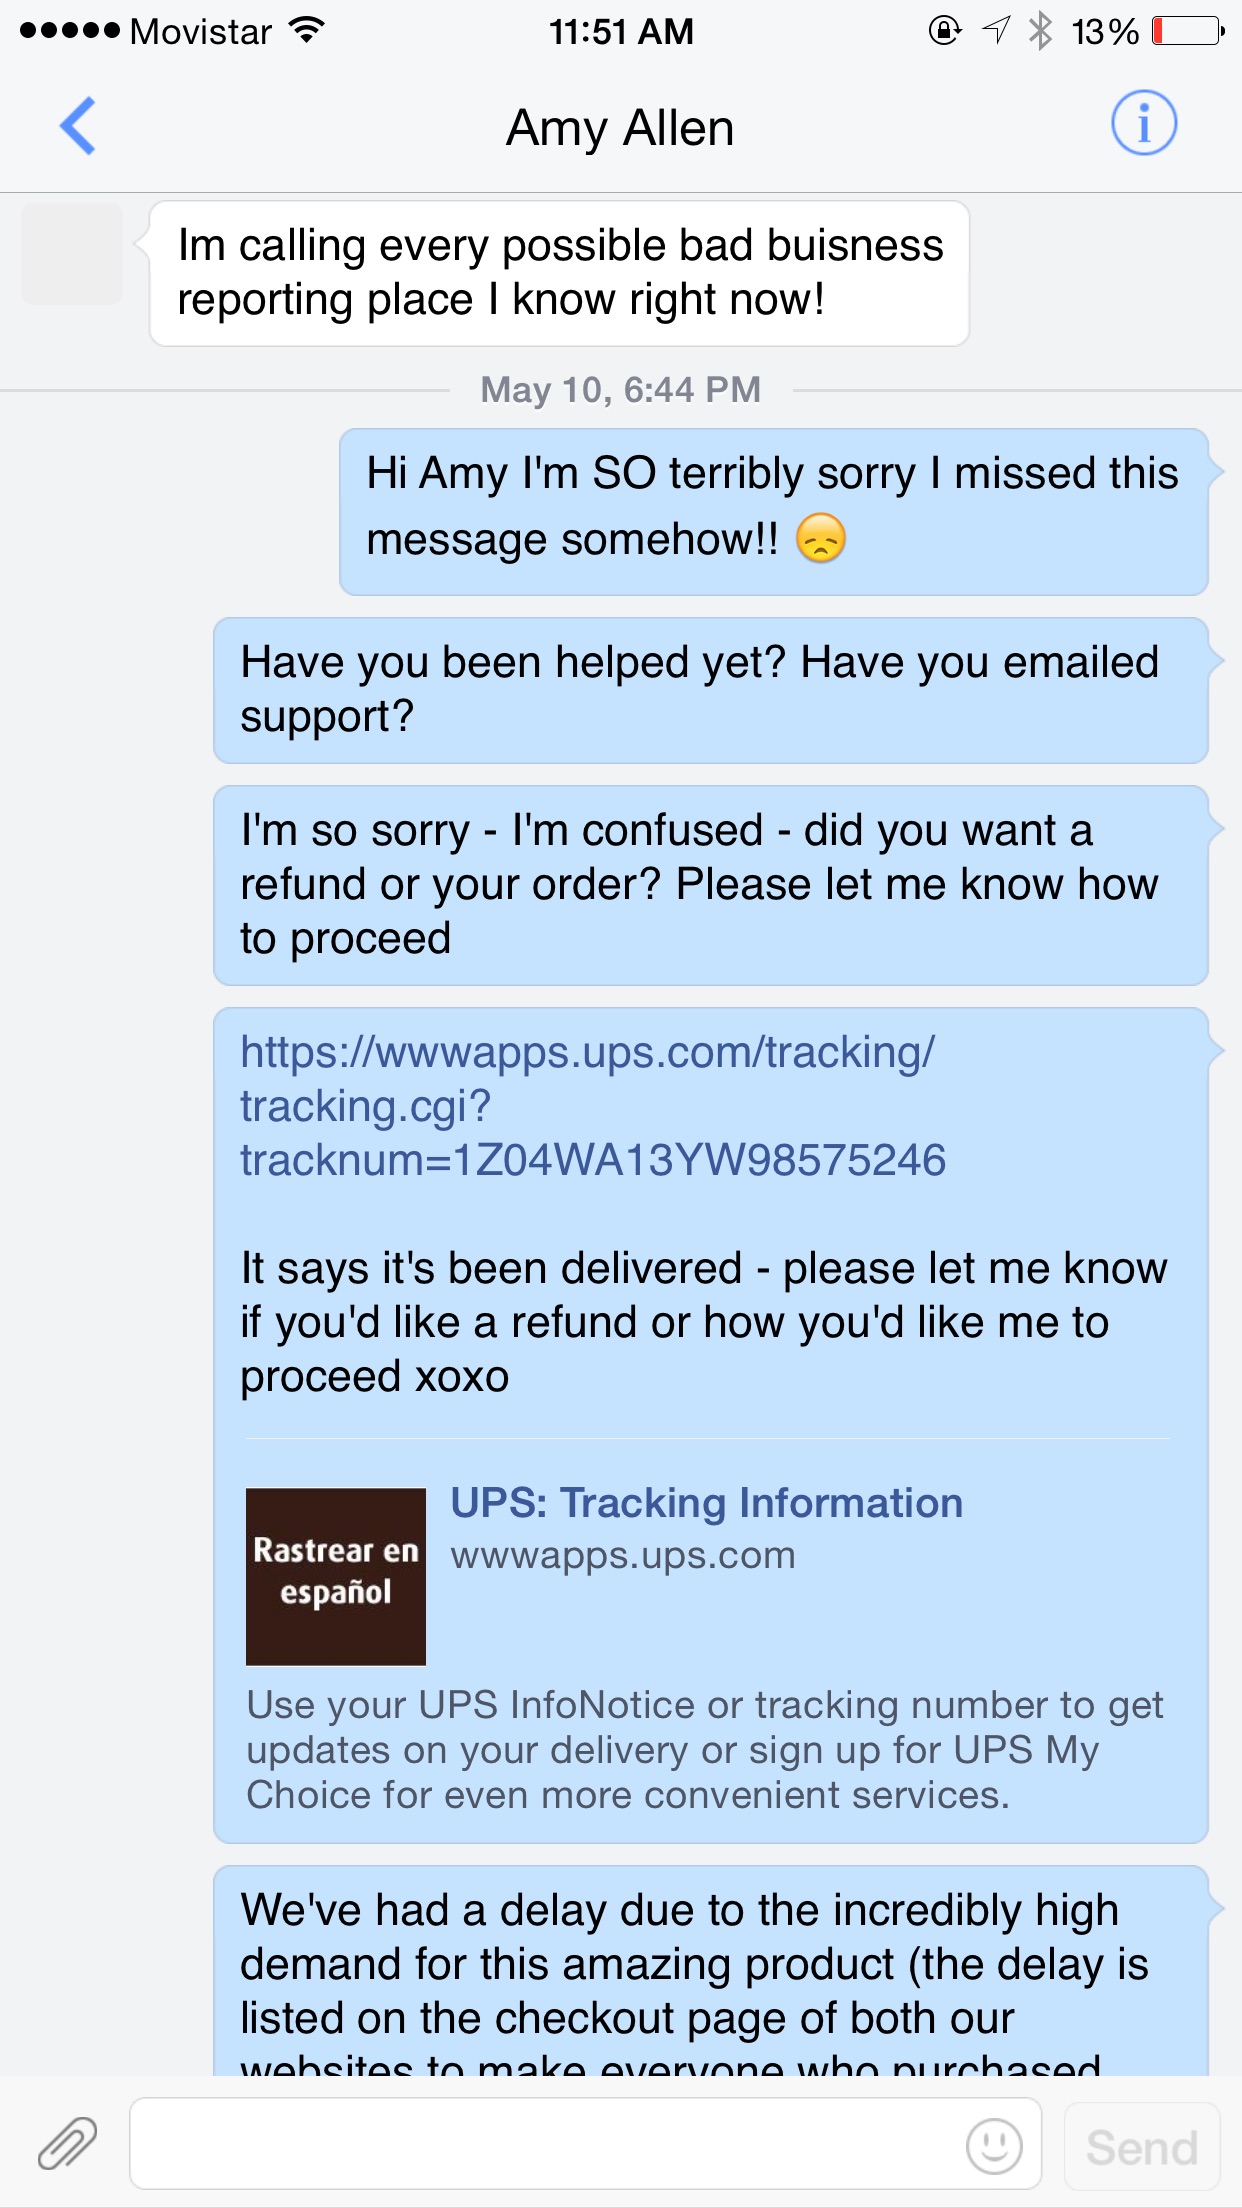 She threatened to go on "bad business sites" when her product had been delivered. We were responsive and professional 